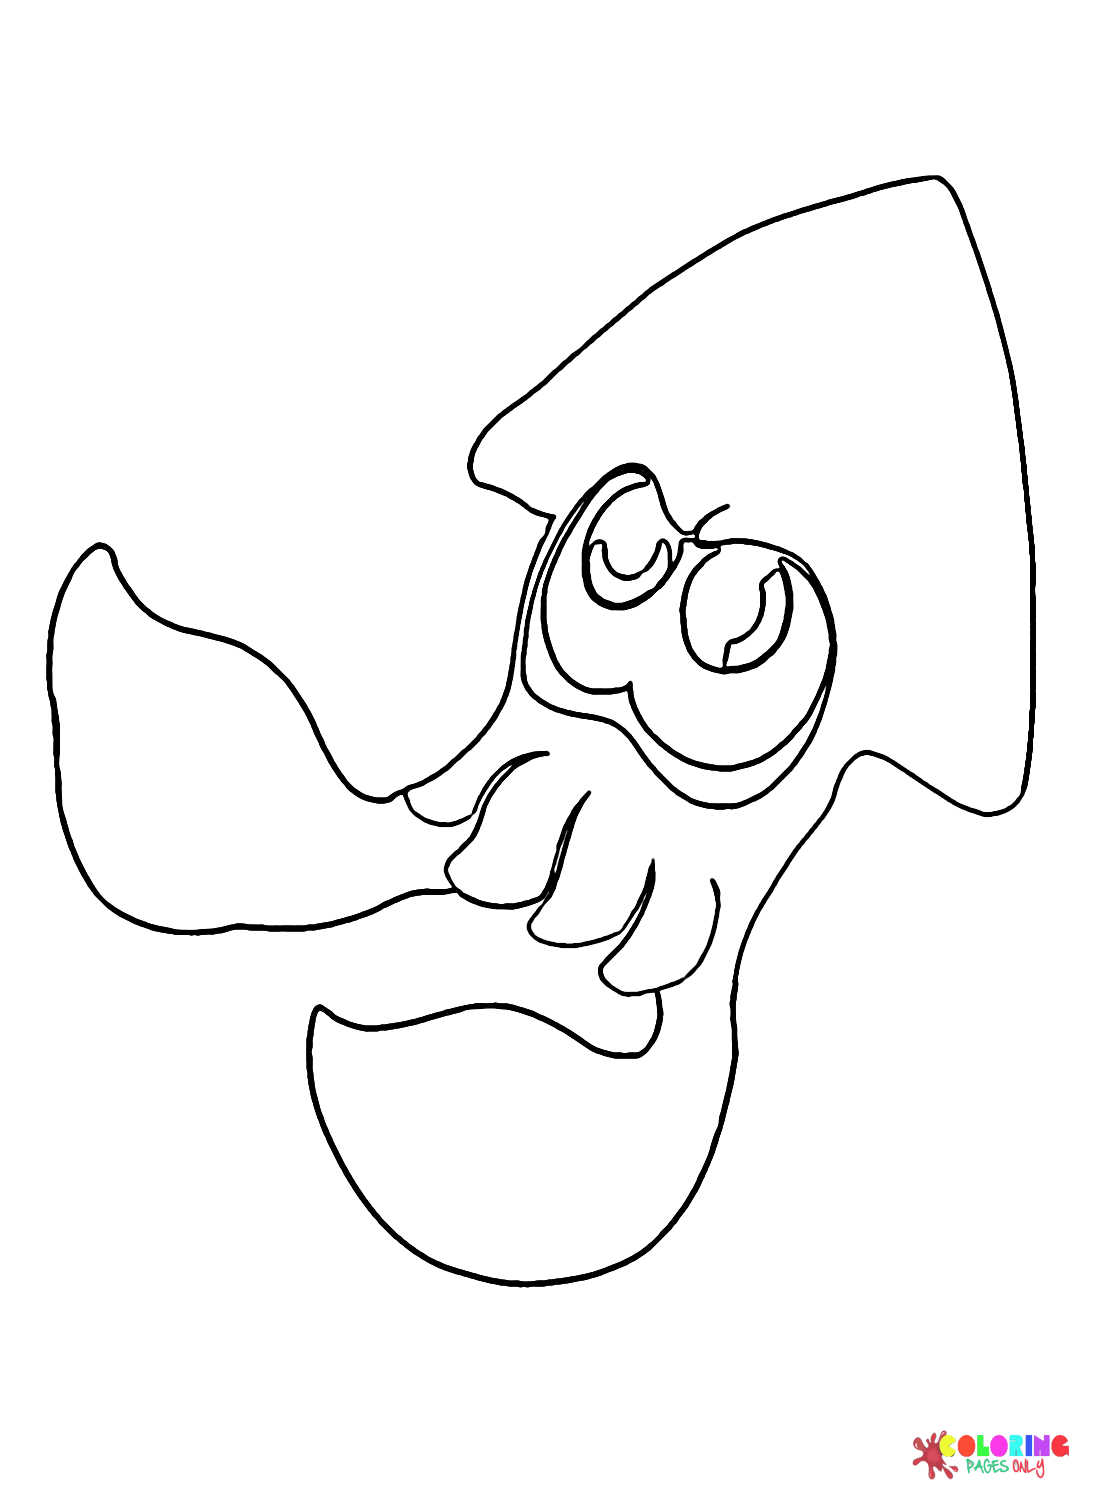 Free Splatoon Squid Coloring Page